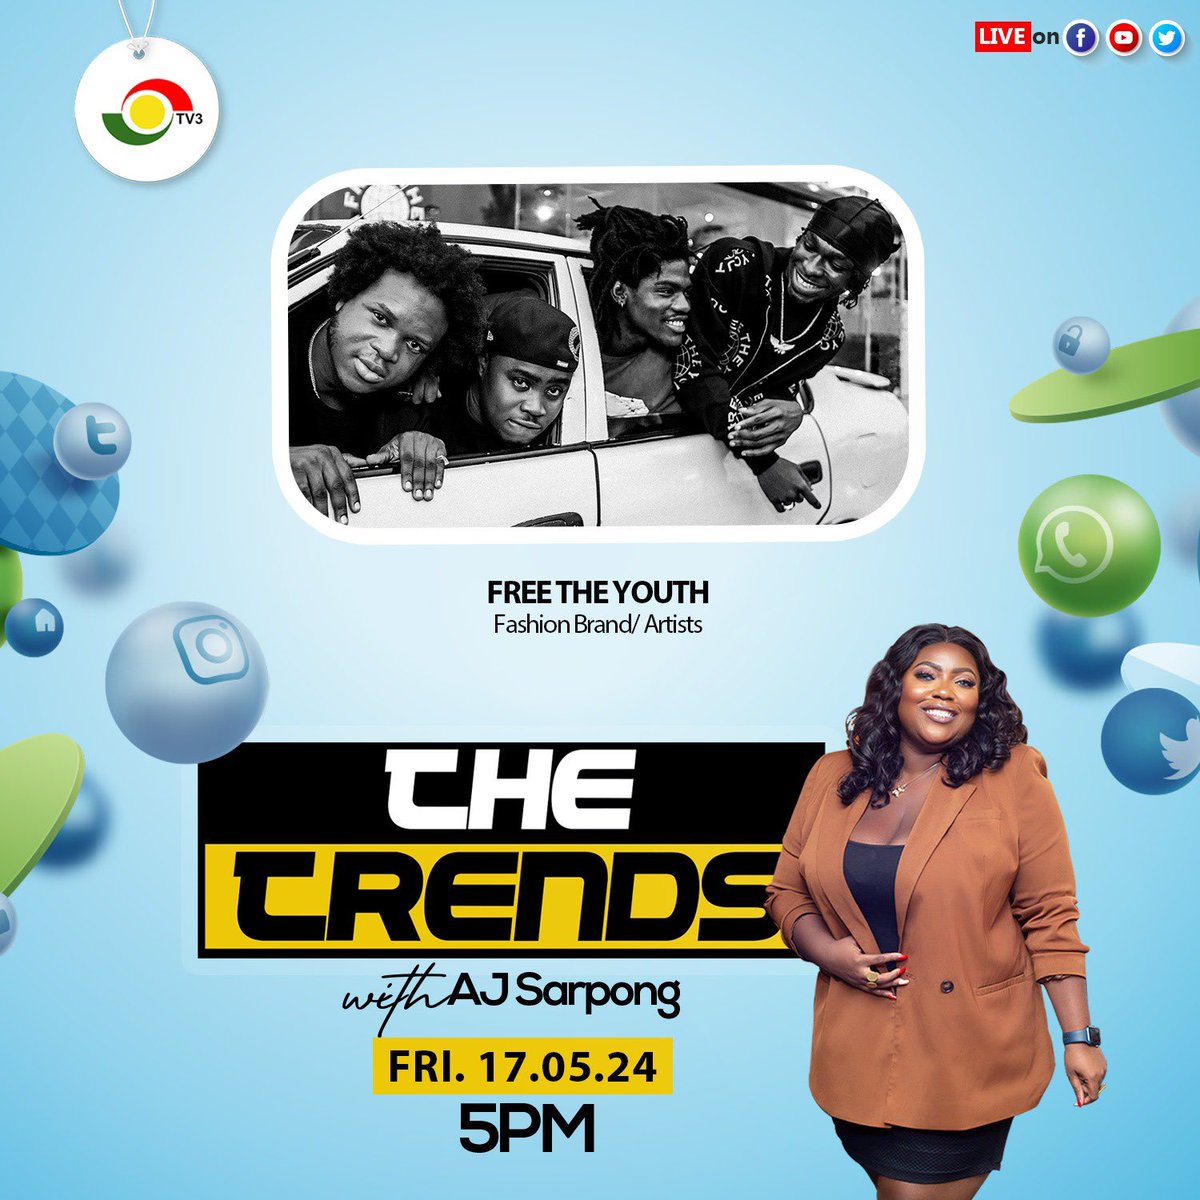 Today on #TheTrends with @ajsarpong, our guests will be fashion brand and artists, Free the Youth. Tune in at 5PM 📺